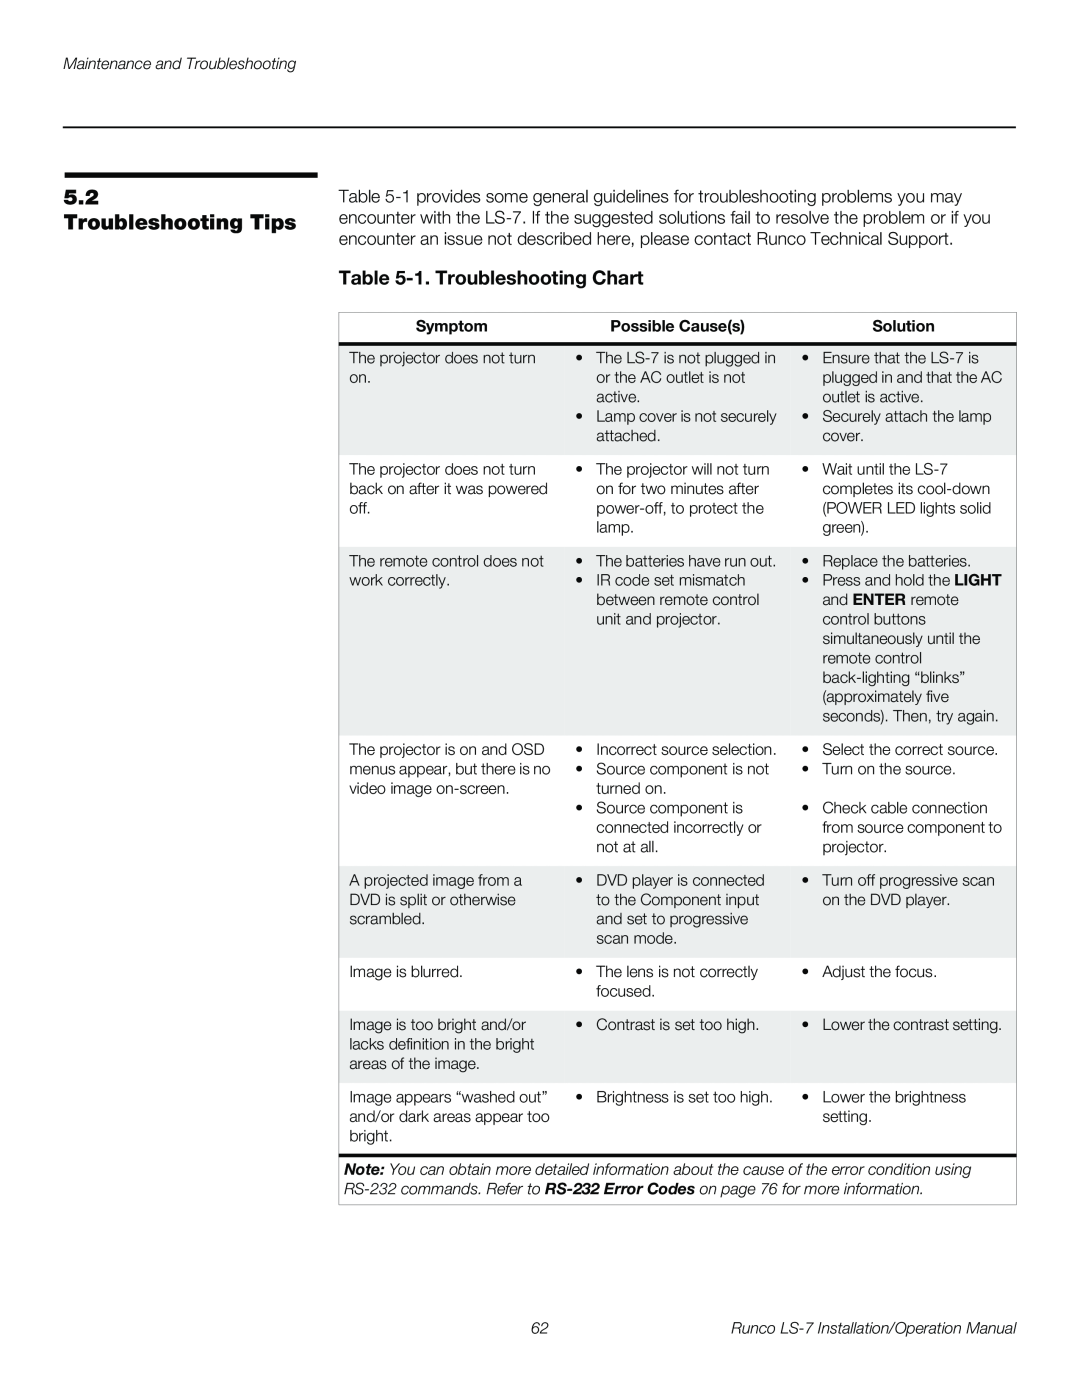 Runco LS-7 operation manual Troubleshooting Tips, 1.Troubleshooting Chart, Maintenance and Troubleshooting 